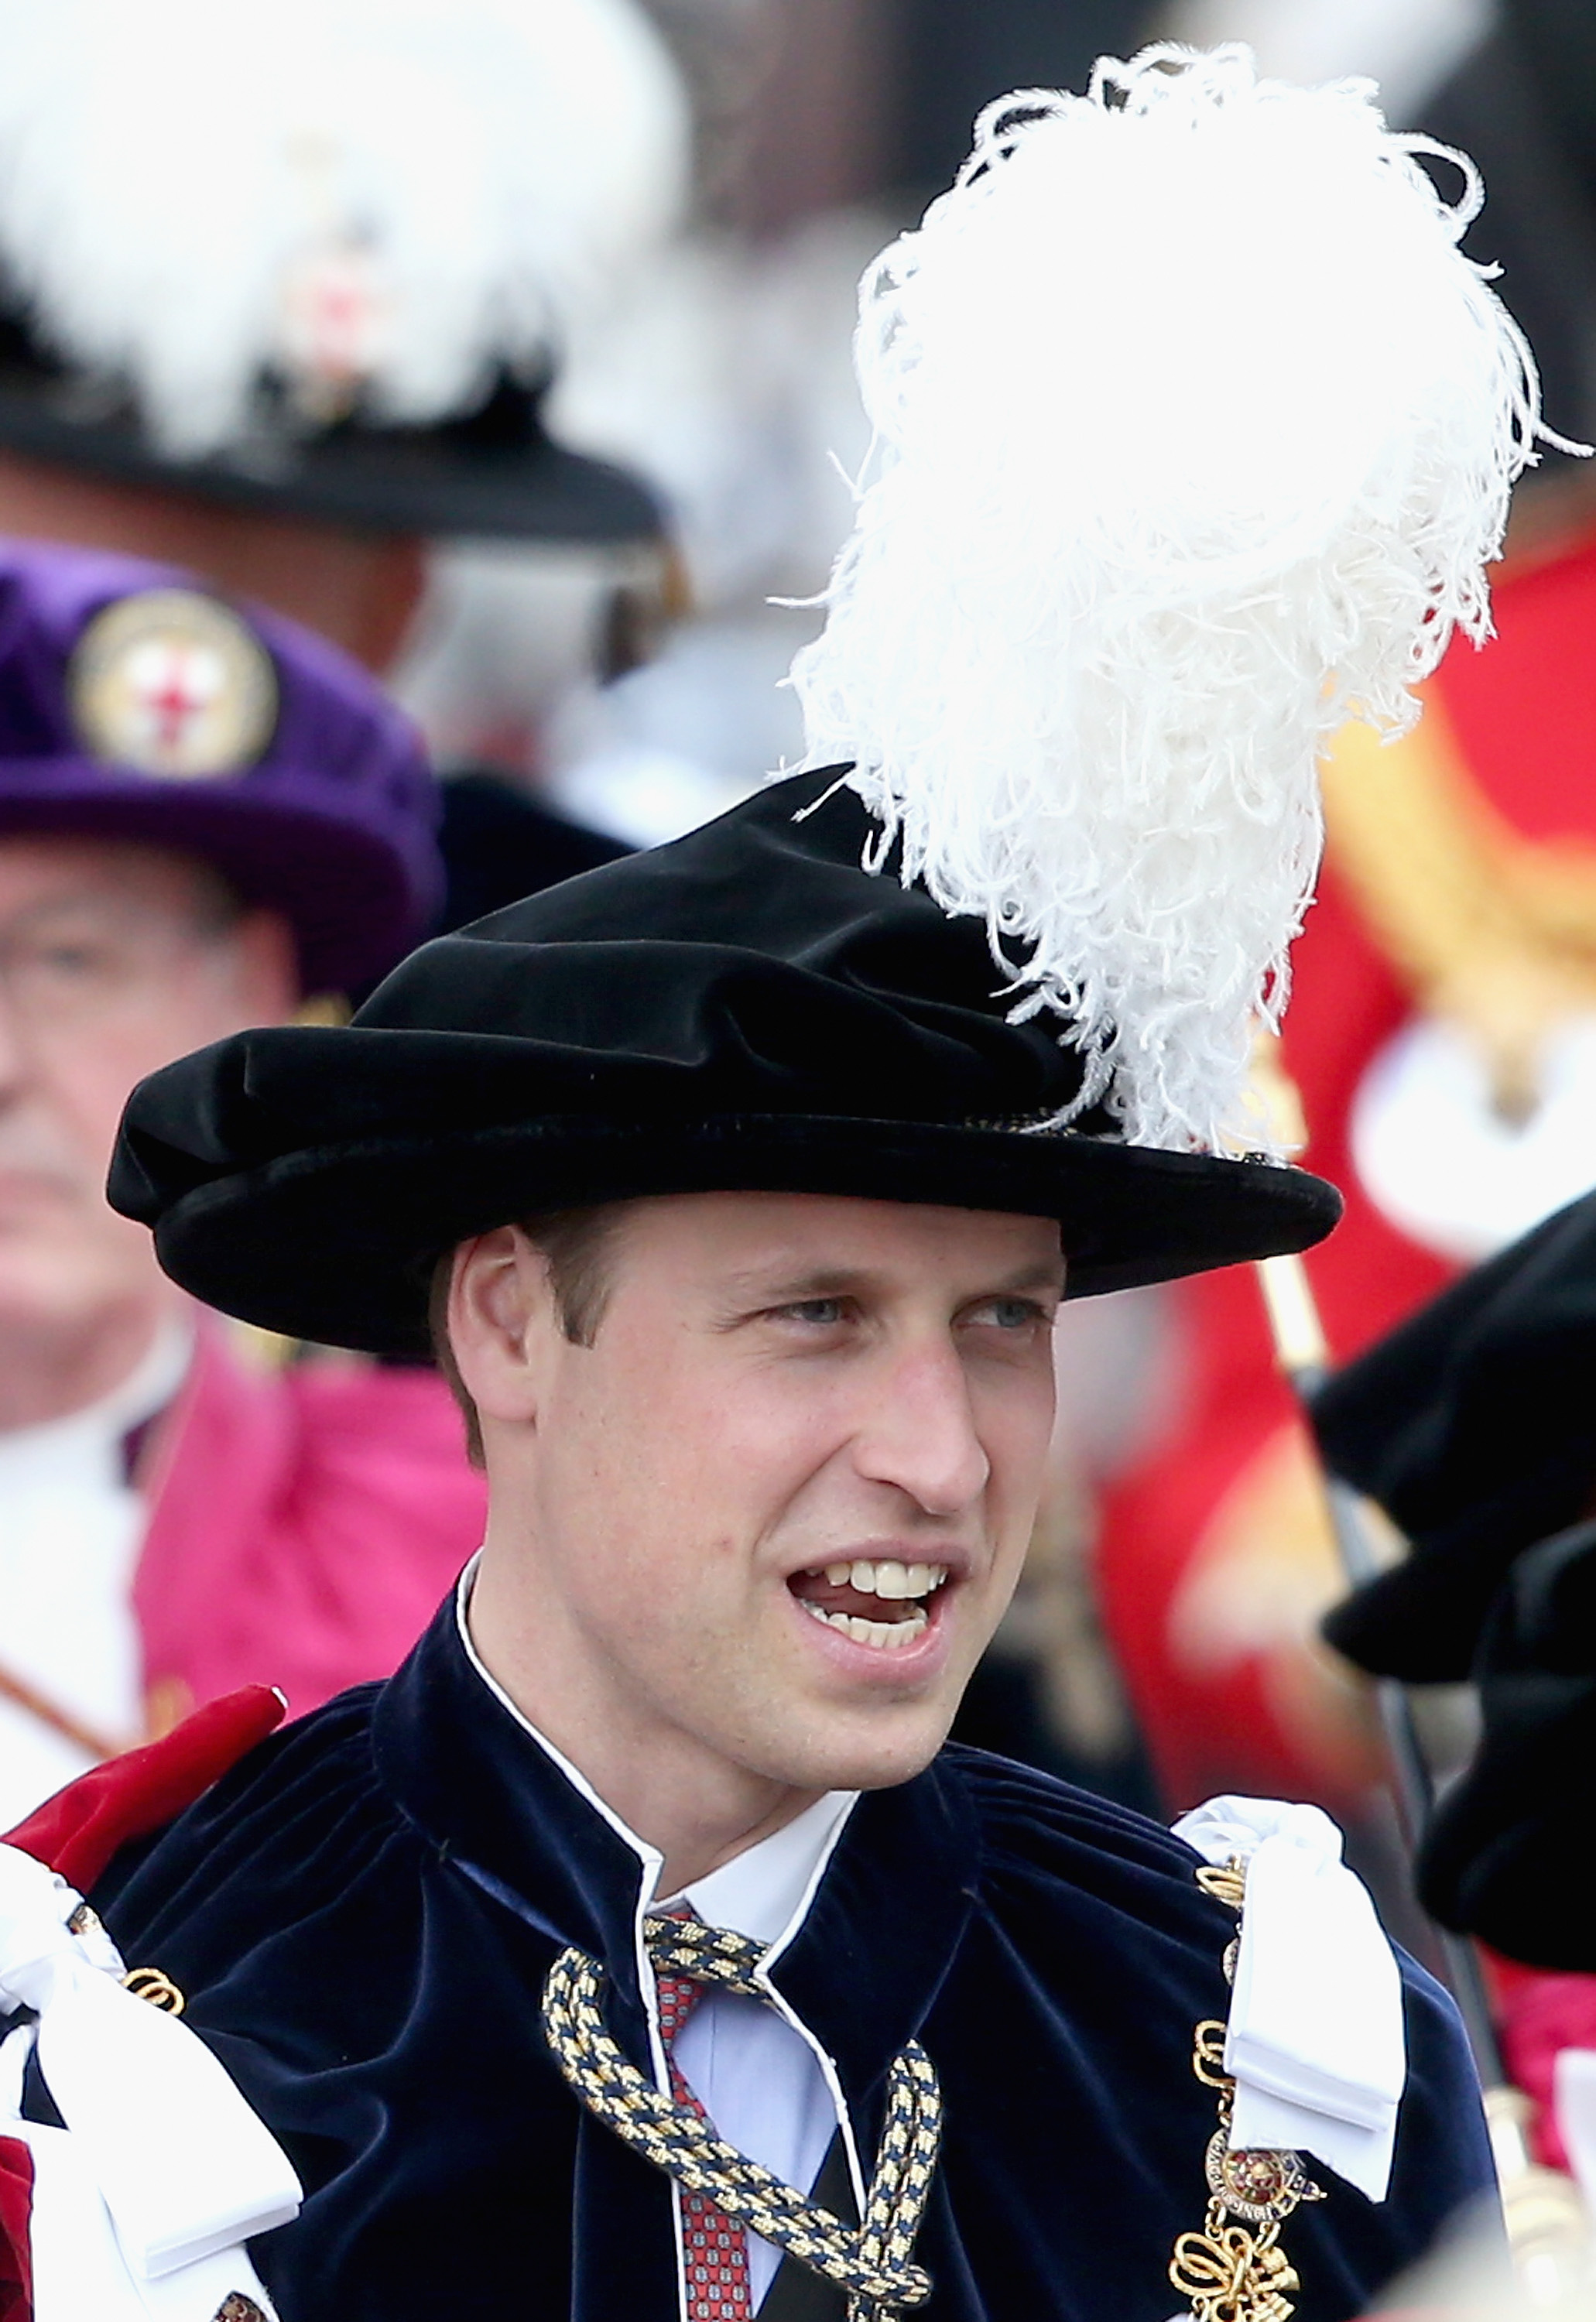 WINDSOR, ENGLAND - JUNE 15:  Prince William, Duke of Cambridge attends the Order of the Garter Service at St George's Chapel at Windsor Castle on June 15, 2015 in Windsor, England. The Order of the Garter is the most senior and the oldest British Order of Chivalry and was founded by Edward III in 1348.  (Photo by Chris Jackson/Getty Images)